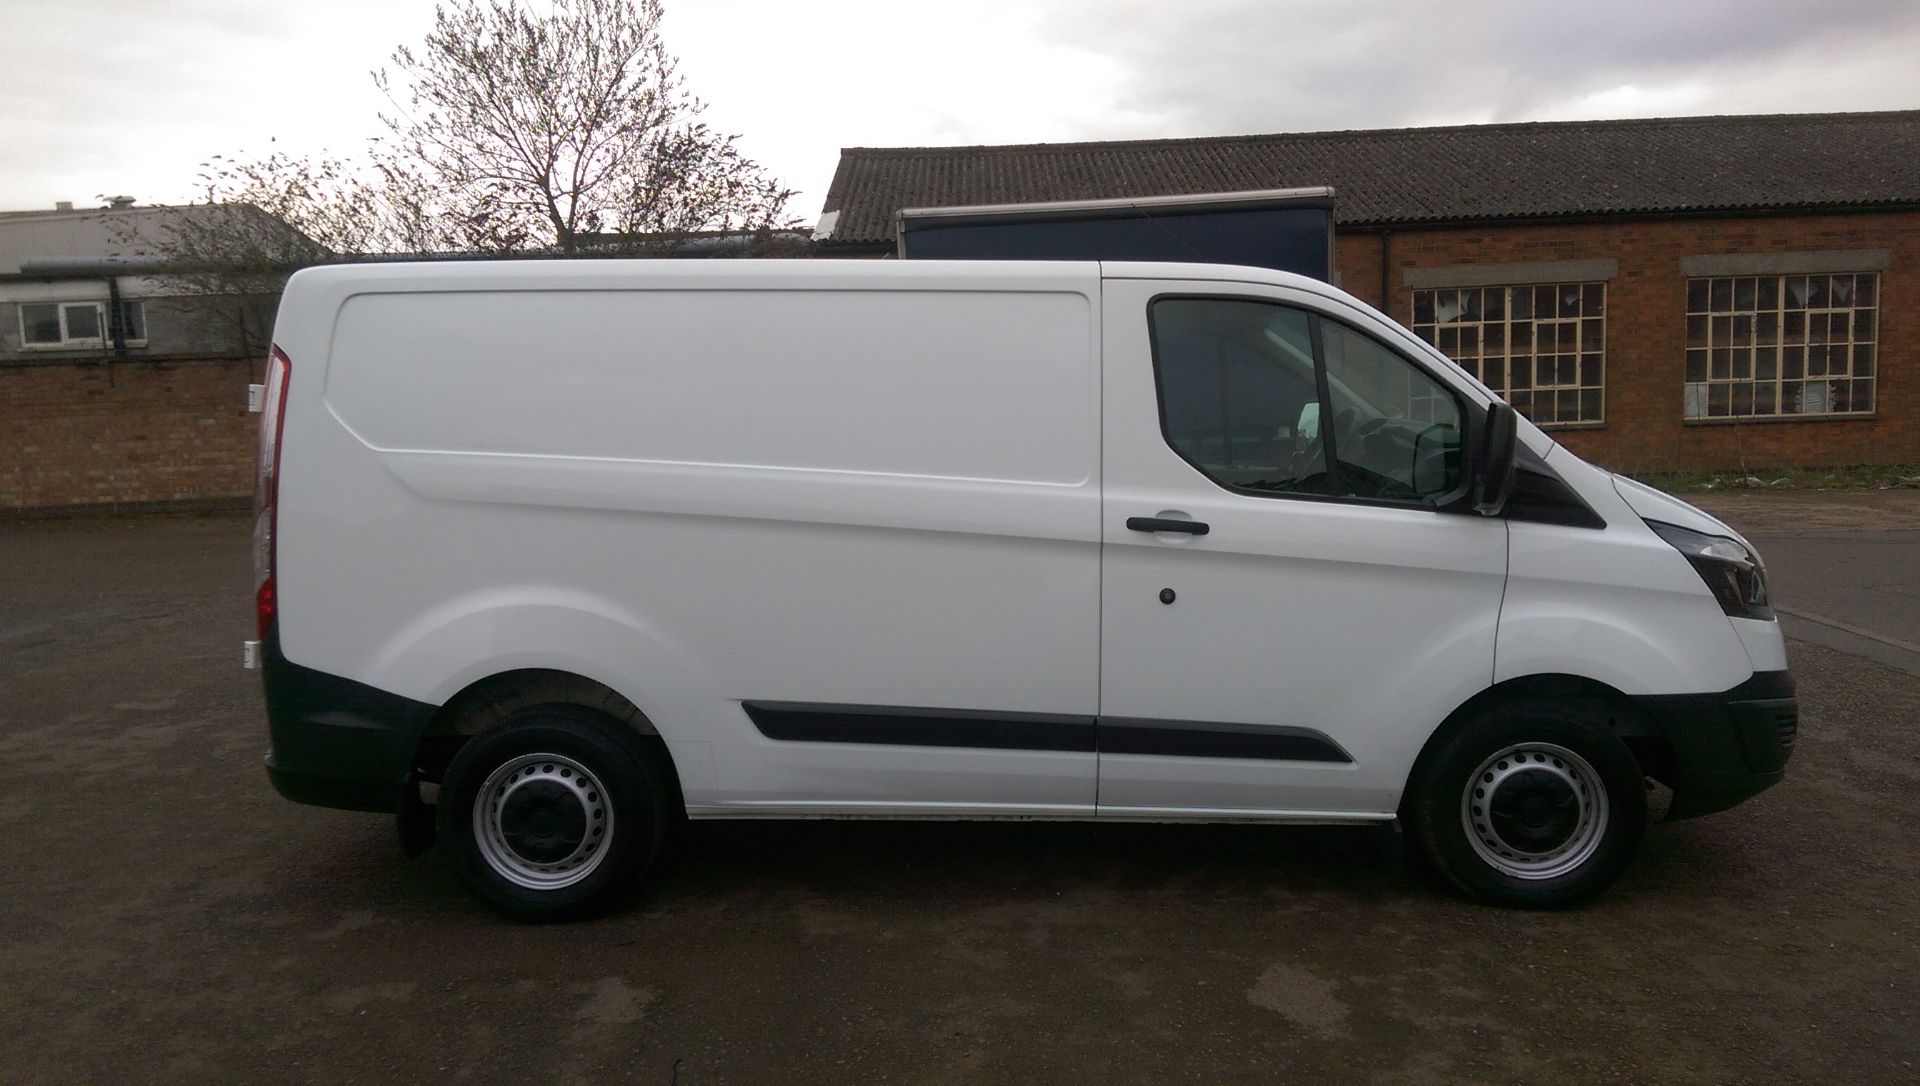 Ford Transit 100PS T270 FDW SL13 HFS 52k miles - Image 5 of 5